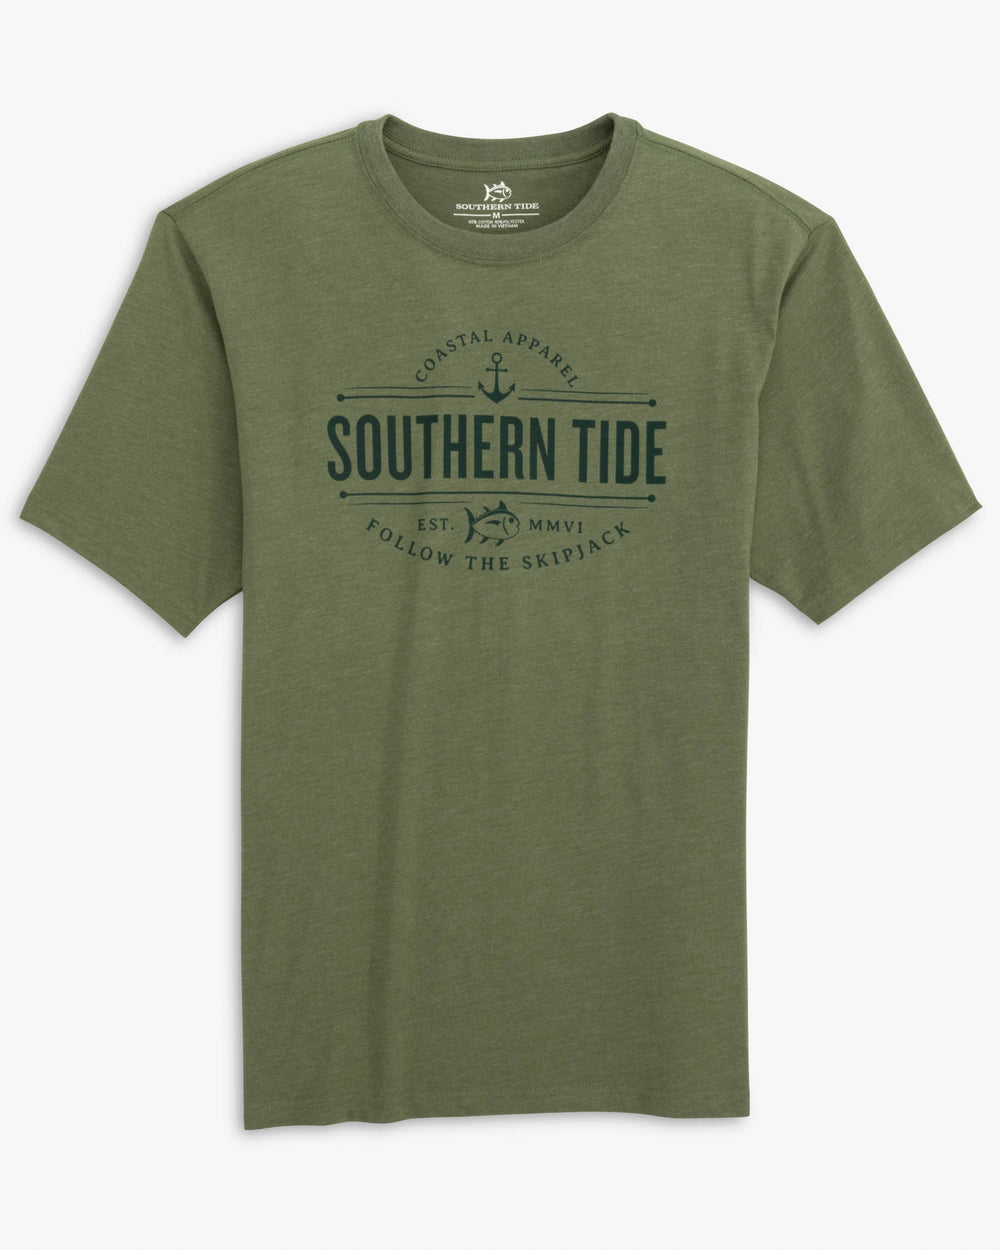 The front view of the Heather Southern Tide Coastal Apparel T-Shirt by Southern Tide - Heather Hunter Green